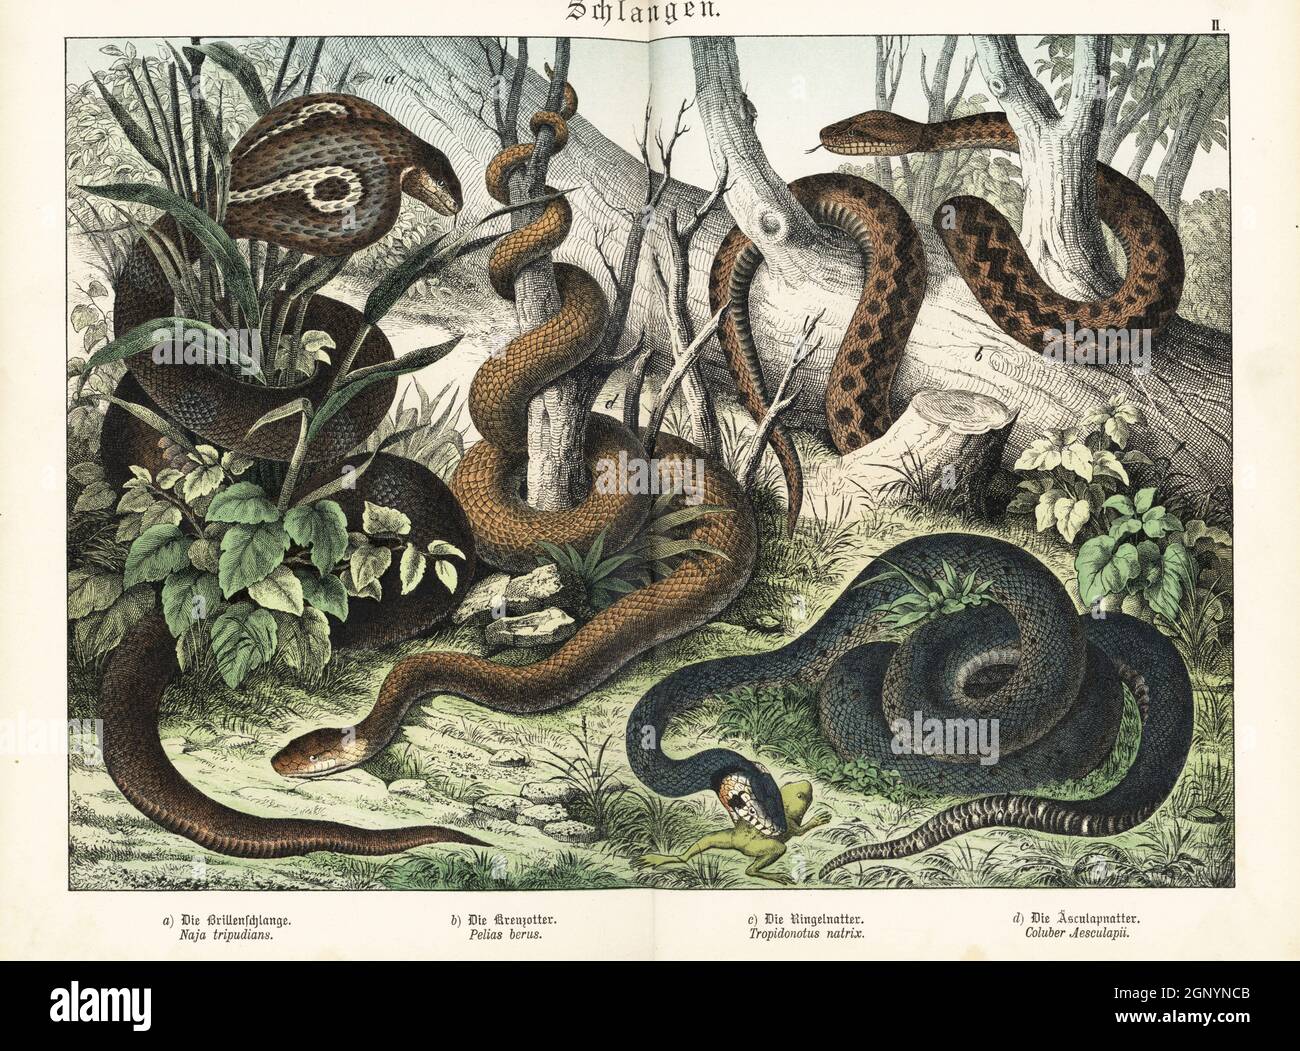 Monocled cobra, Naja kaouthia a, common European adder, Vipera berus b, grass snake with frog, Natrix natrix, c, and South American false coralsnake, Erythrolamprus aesculapii d. Chromolithograph from Gotthilf Heinrich von Schubert's Natural History of Animal Kingdoms for School and Home (Naturgeschichte des Tierreichs fur Schule und Haus), Schreiber, Munich, 1886. Stock Photo